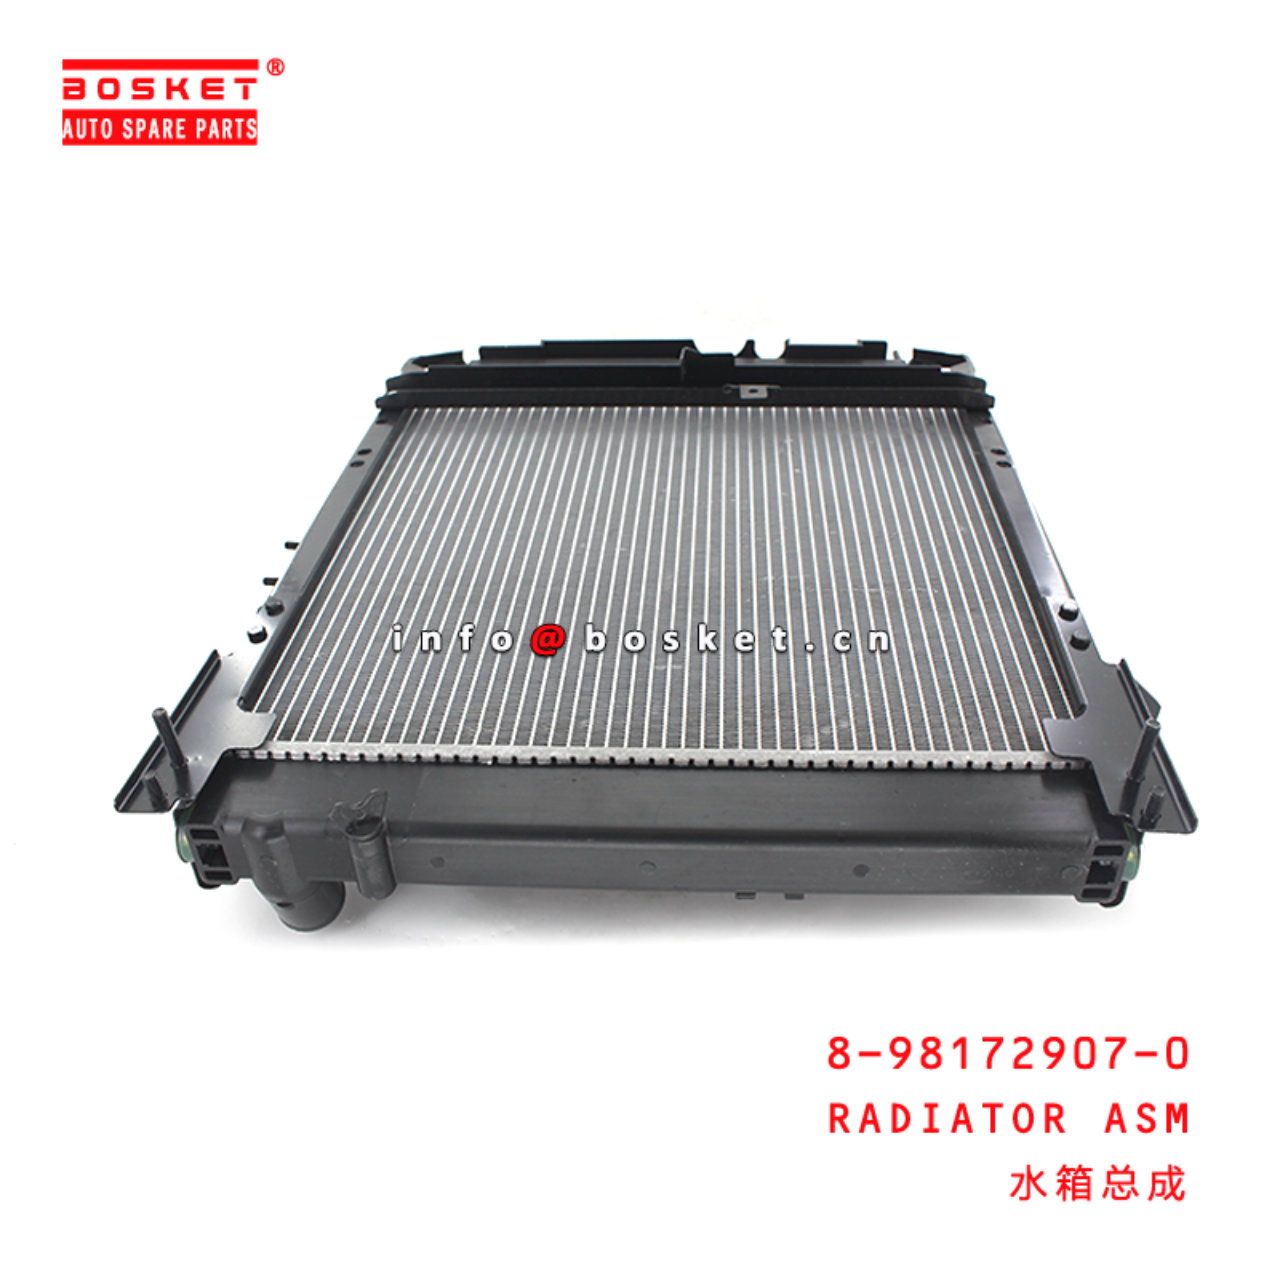 8-98172907-0 Radiator Assembly Suitable for ISUZU 8981729070